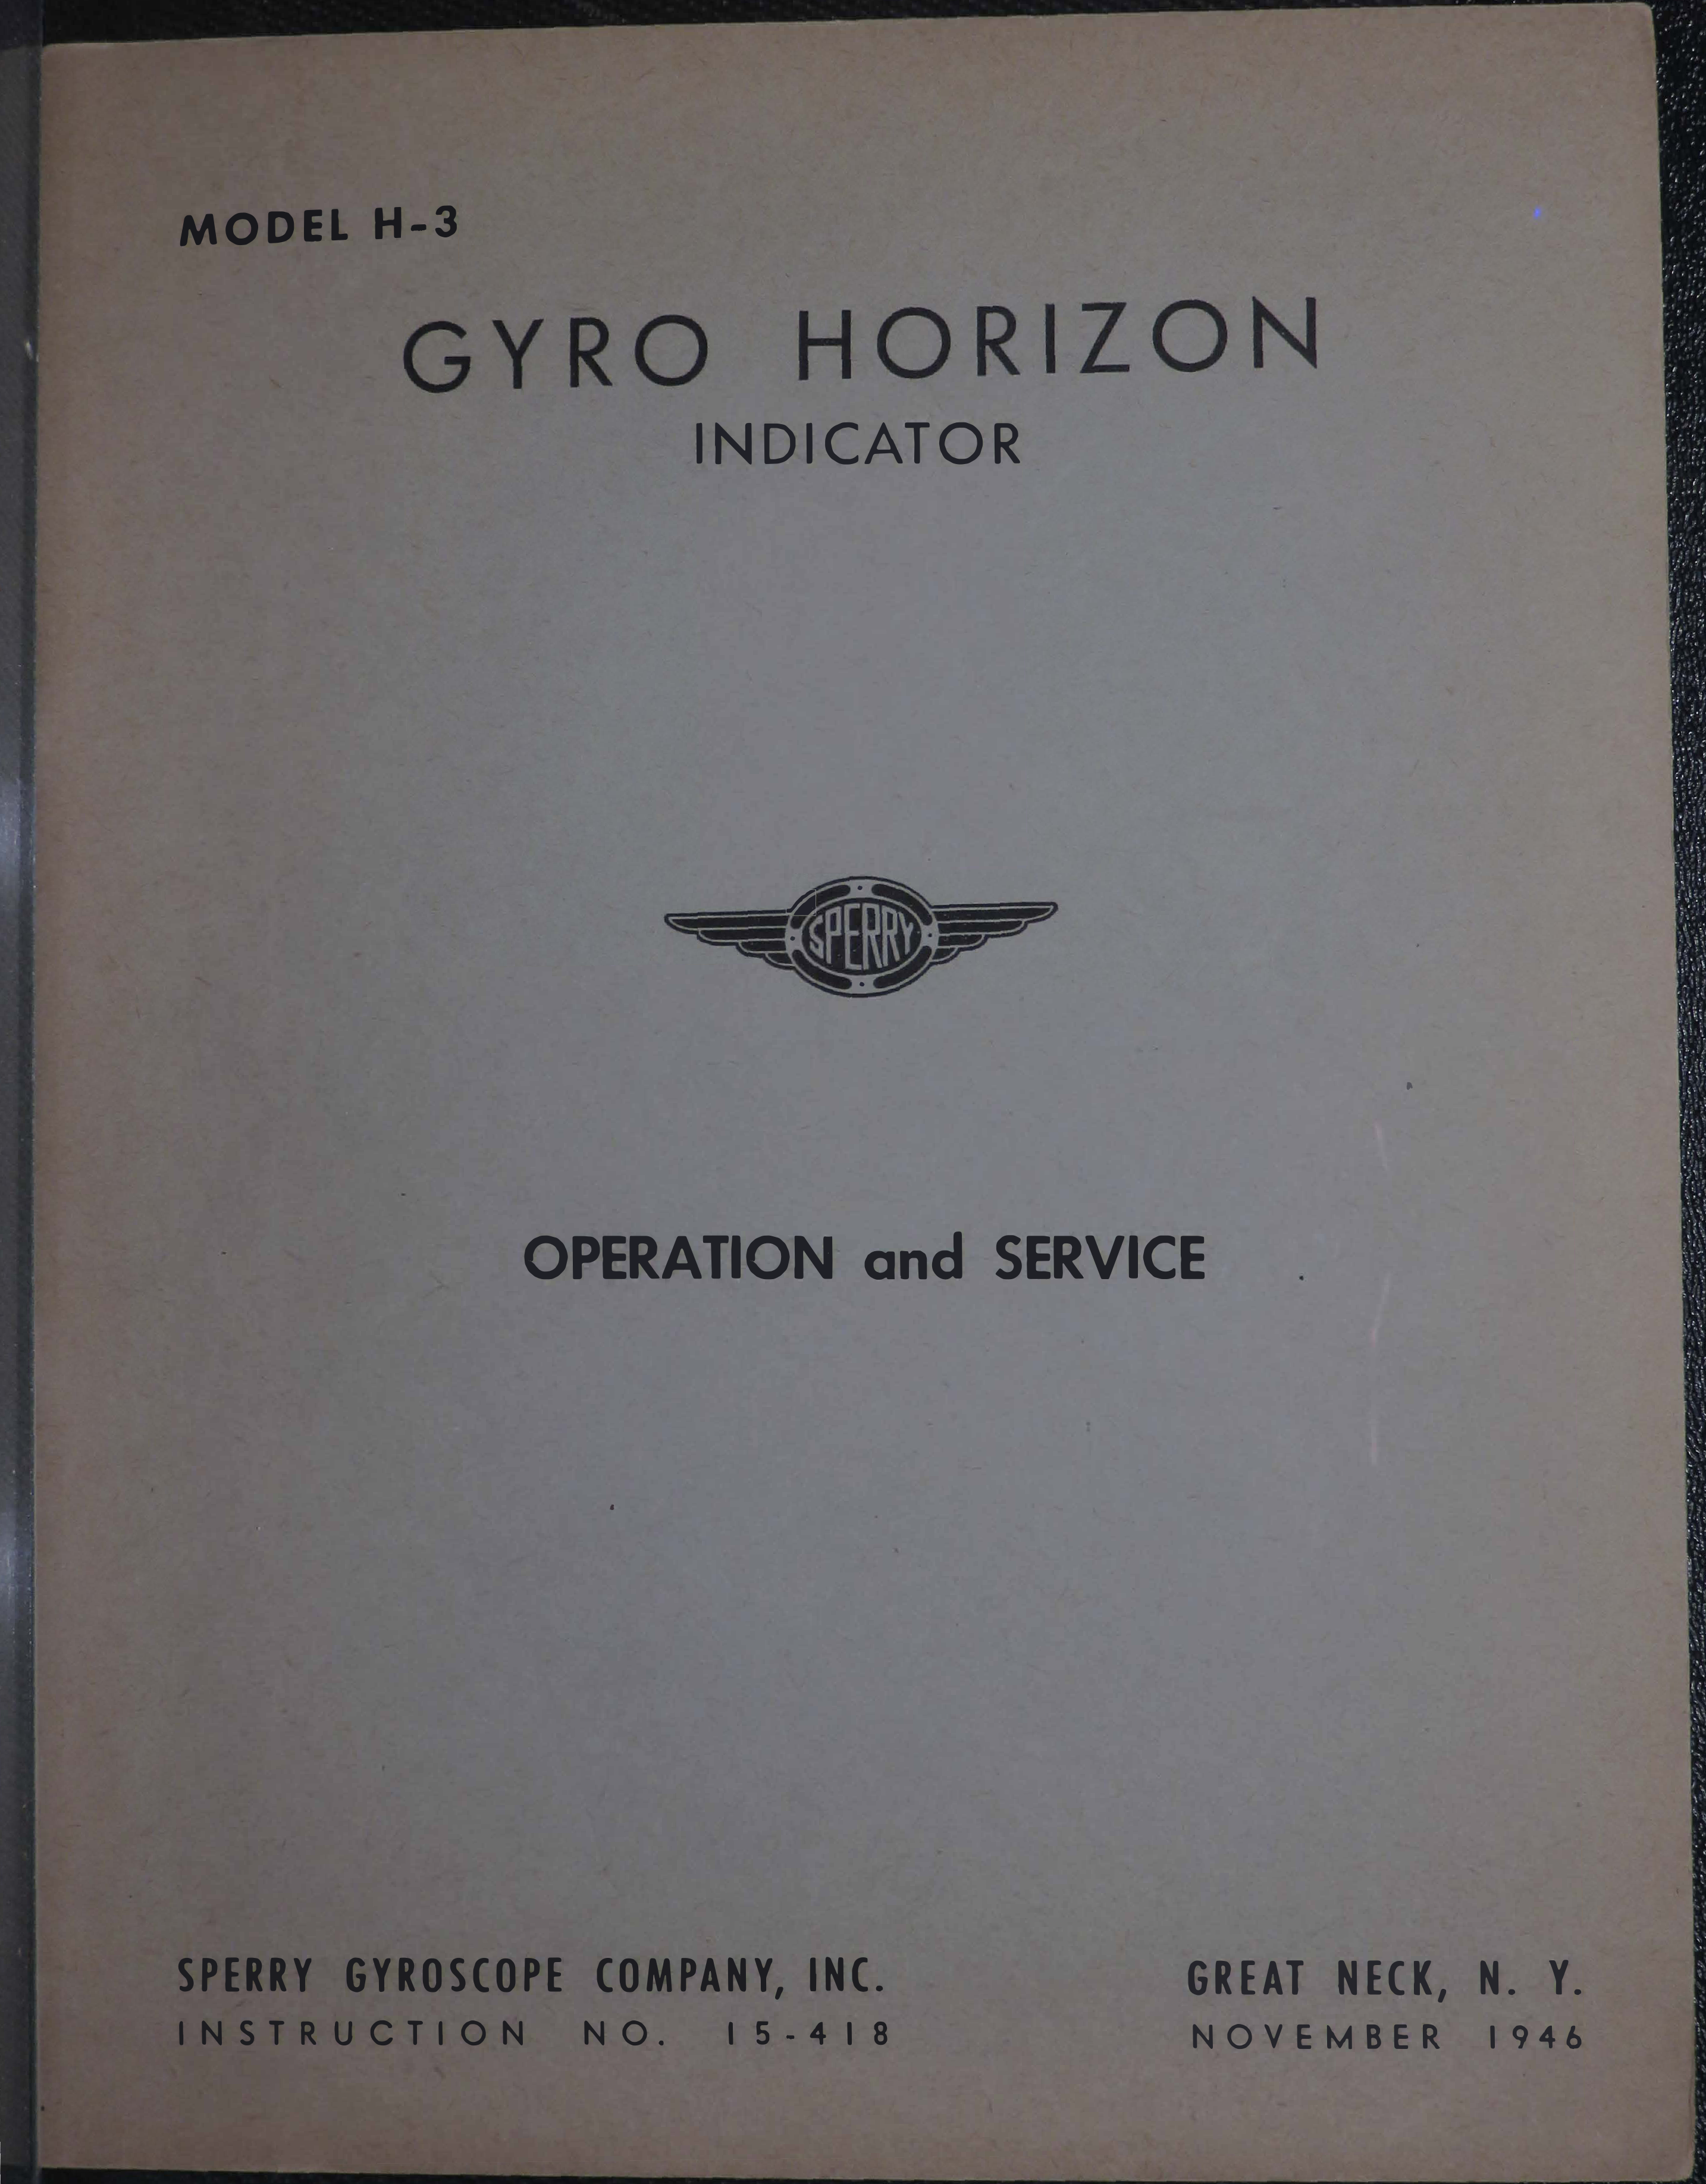 Sample page 1 from AirCorps Library document: Operation and Service for Model H-3 Gyro Horizon Indicator